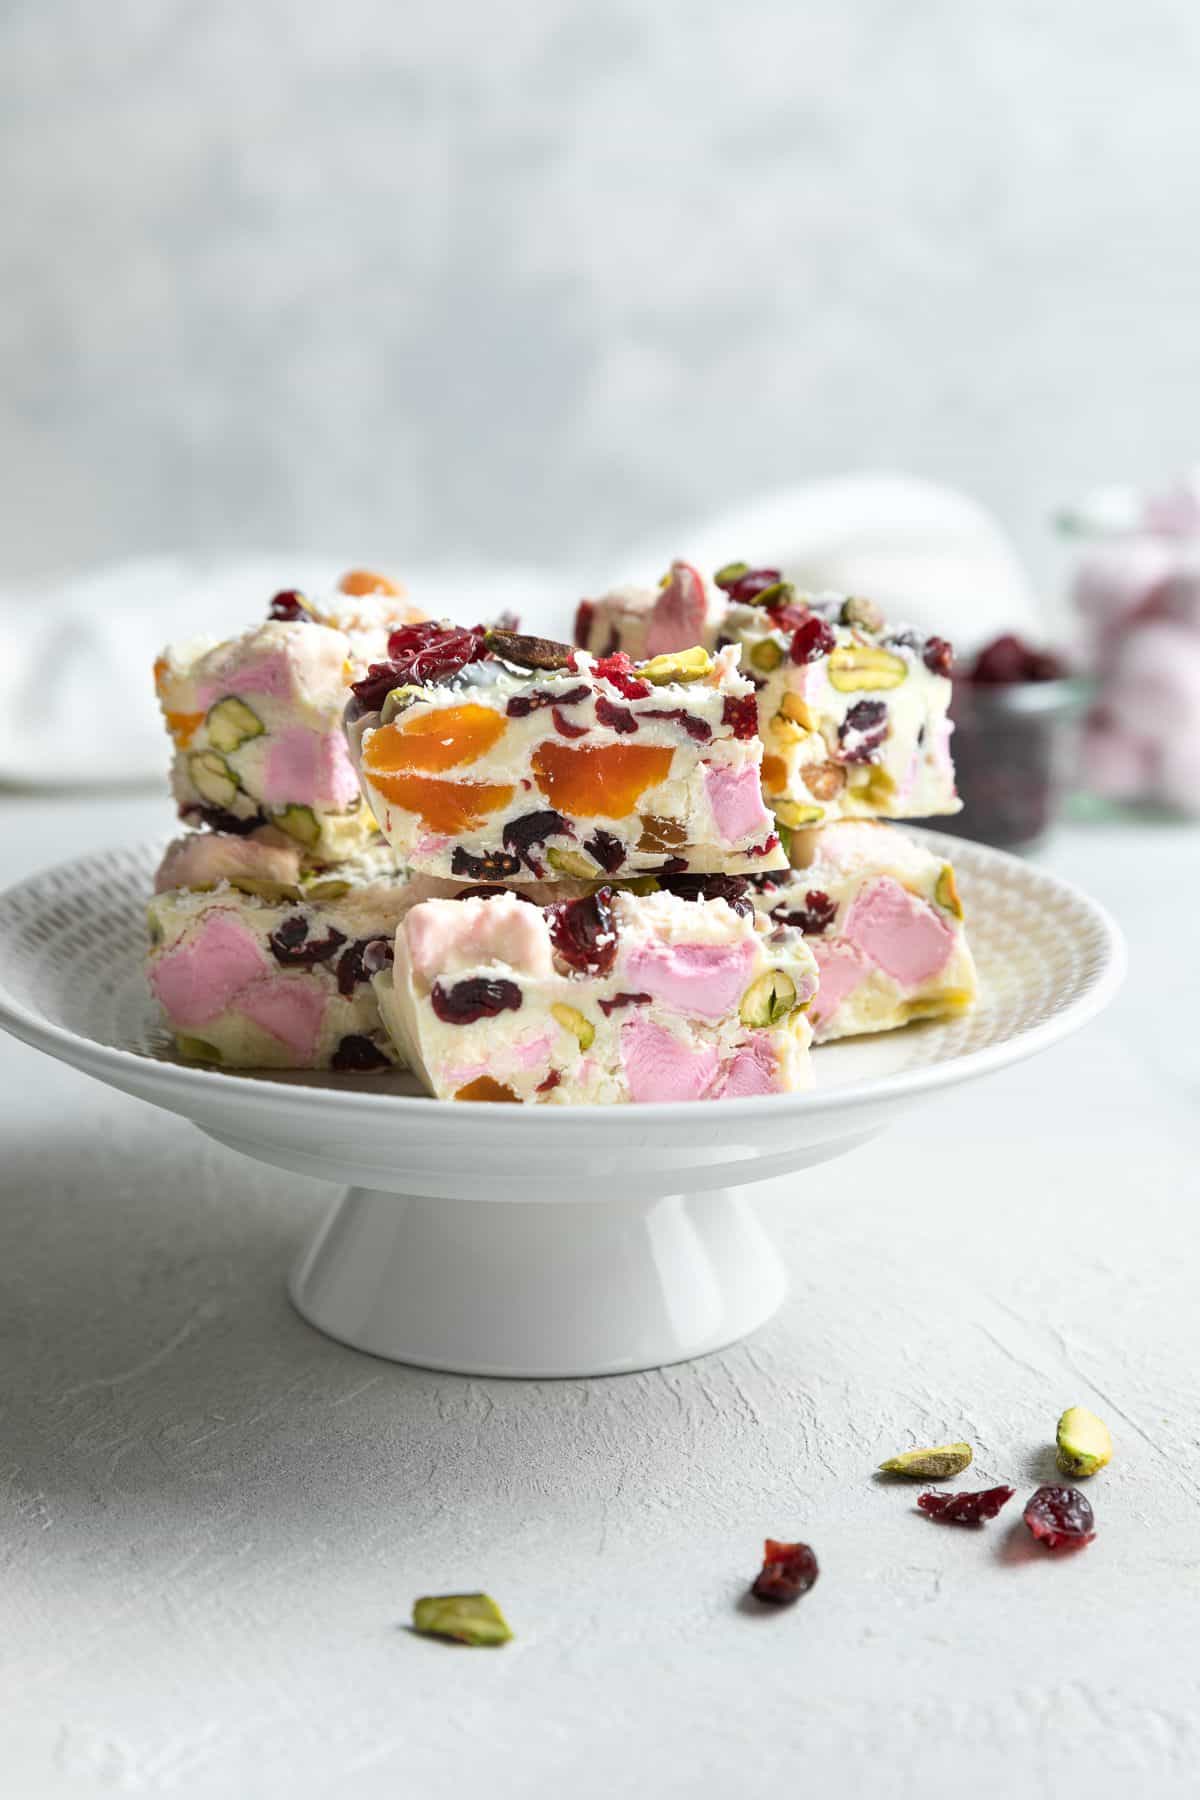 Round white plate with cut pieces of rocky road.